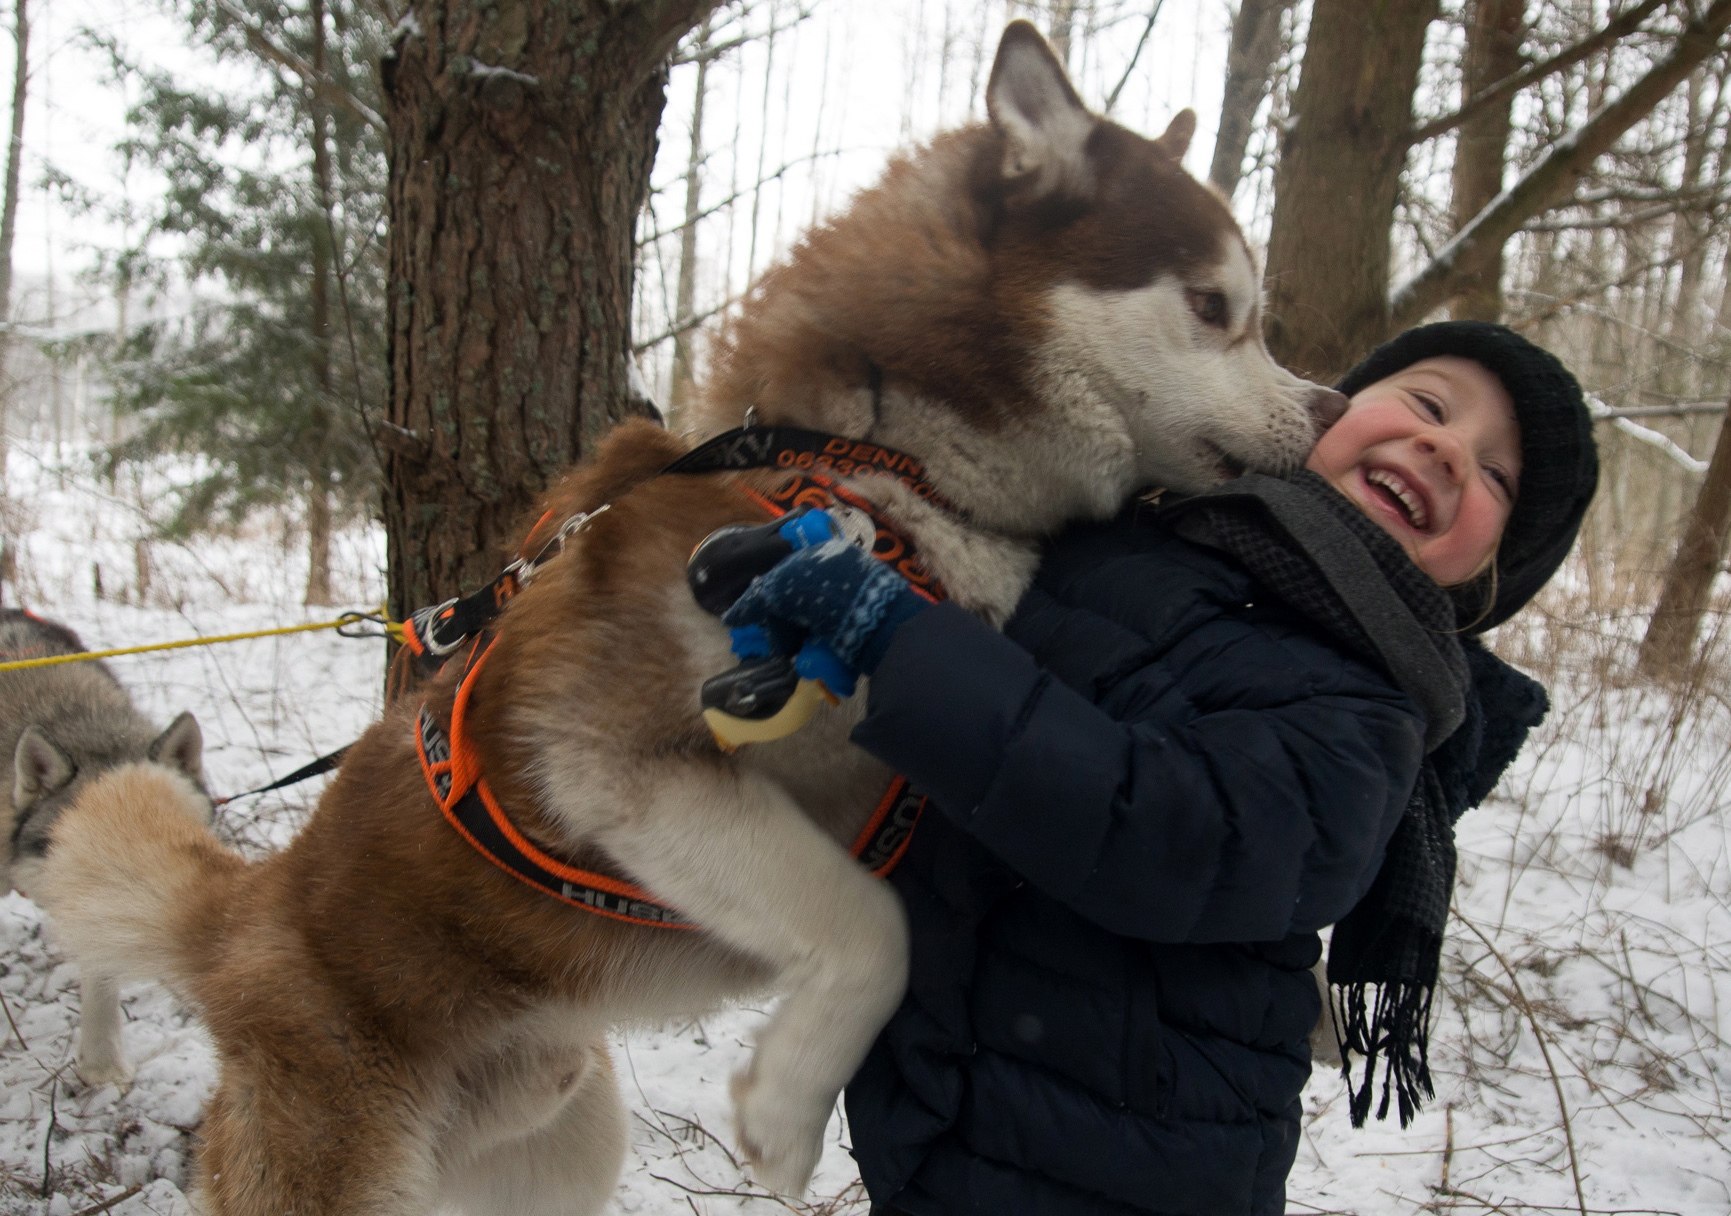 A boy hugs a dog at a sled dog festival in Belarus. Photo: Getty Images